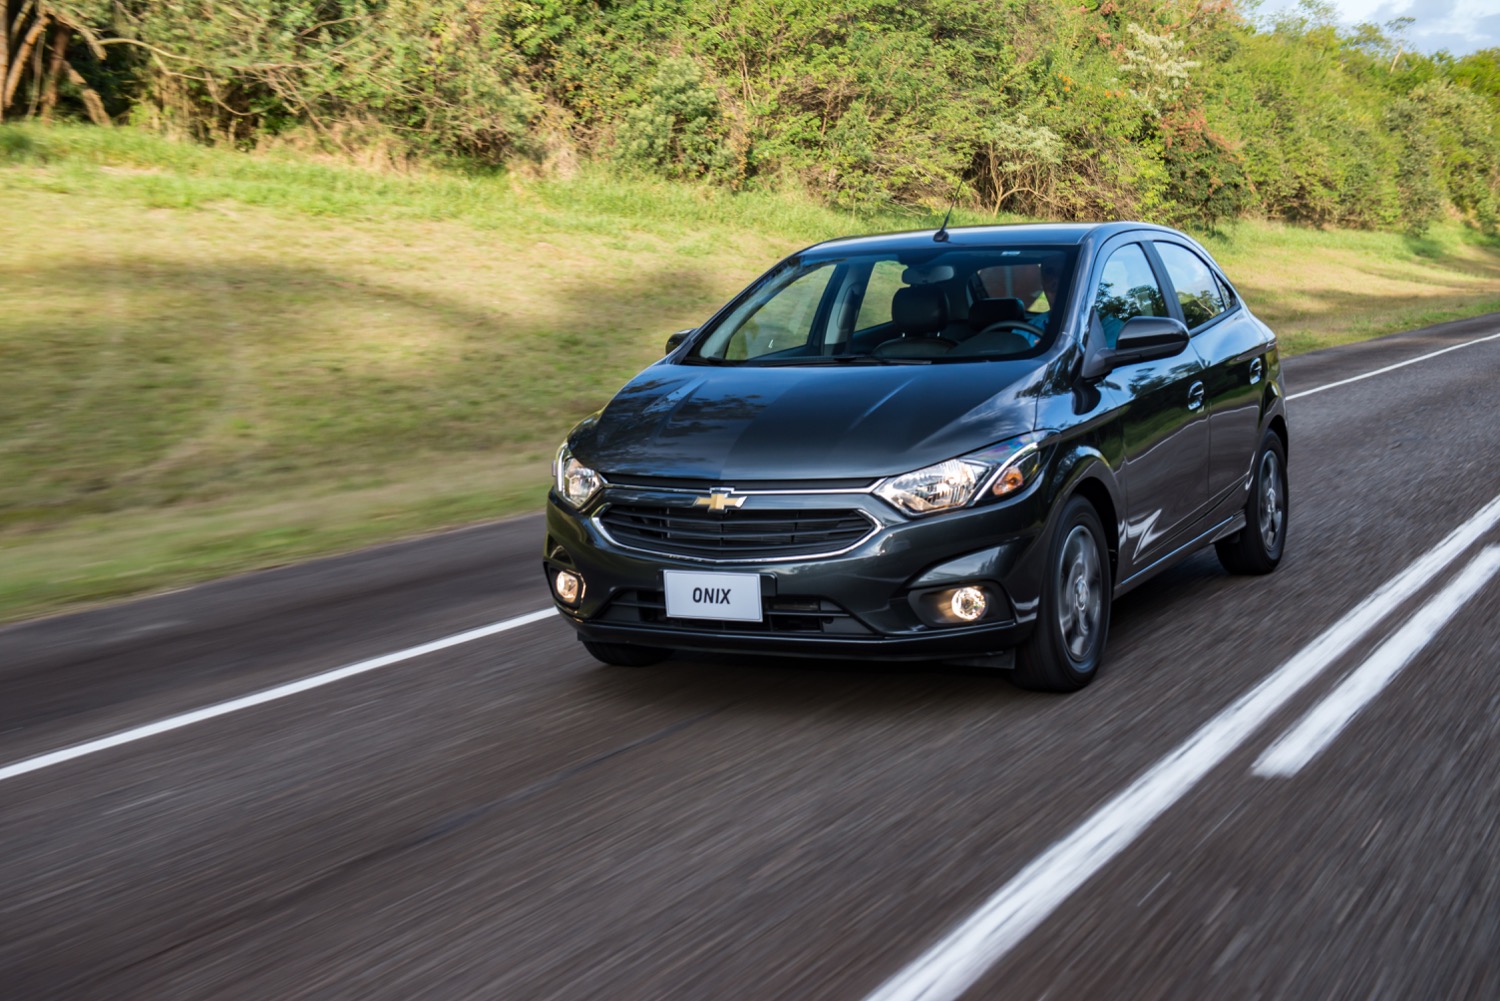 Chevy Onix Was Brazil's Best-Selling Car In November 2017